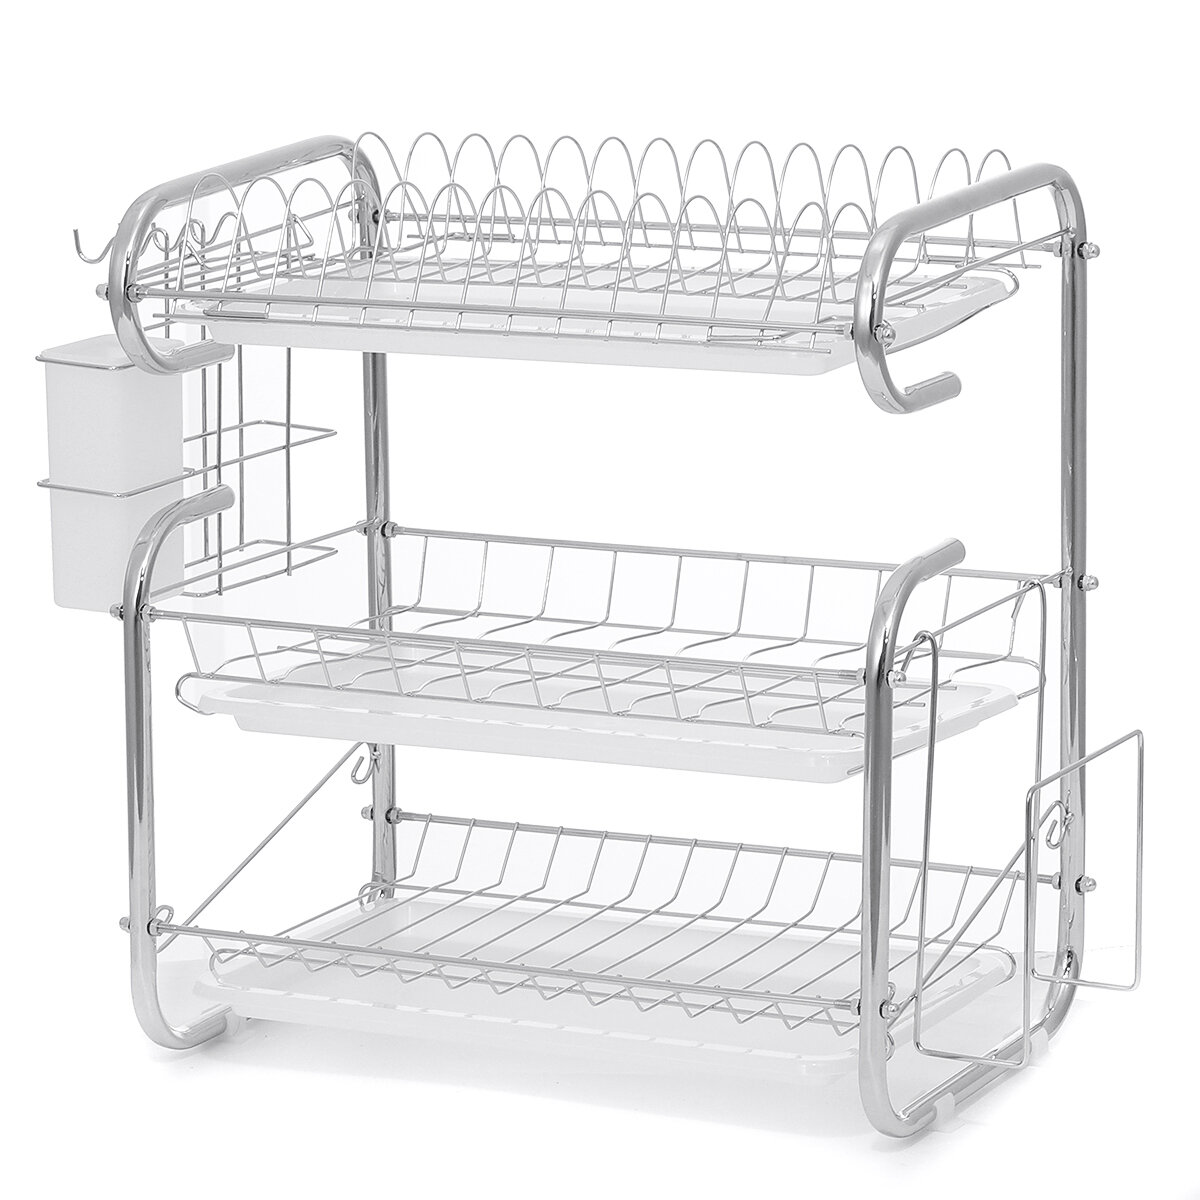 3 Tier Dish Drying Rack Over-the-Sink Kitchen Dish Drainer Rack Draining Board